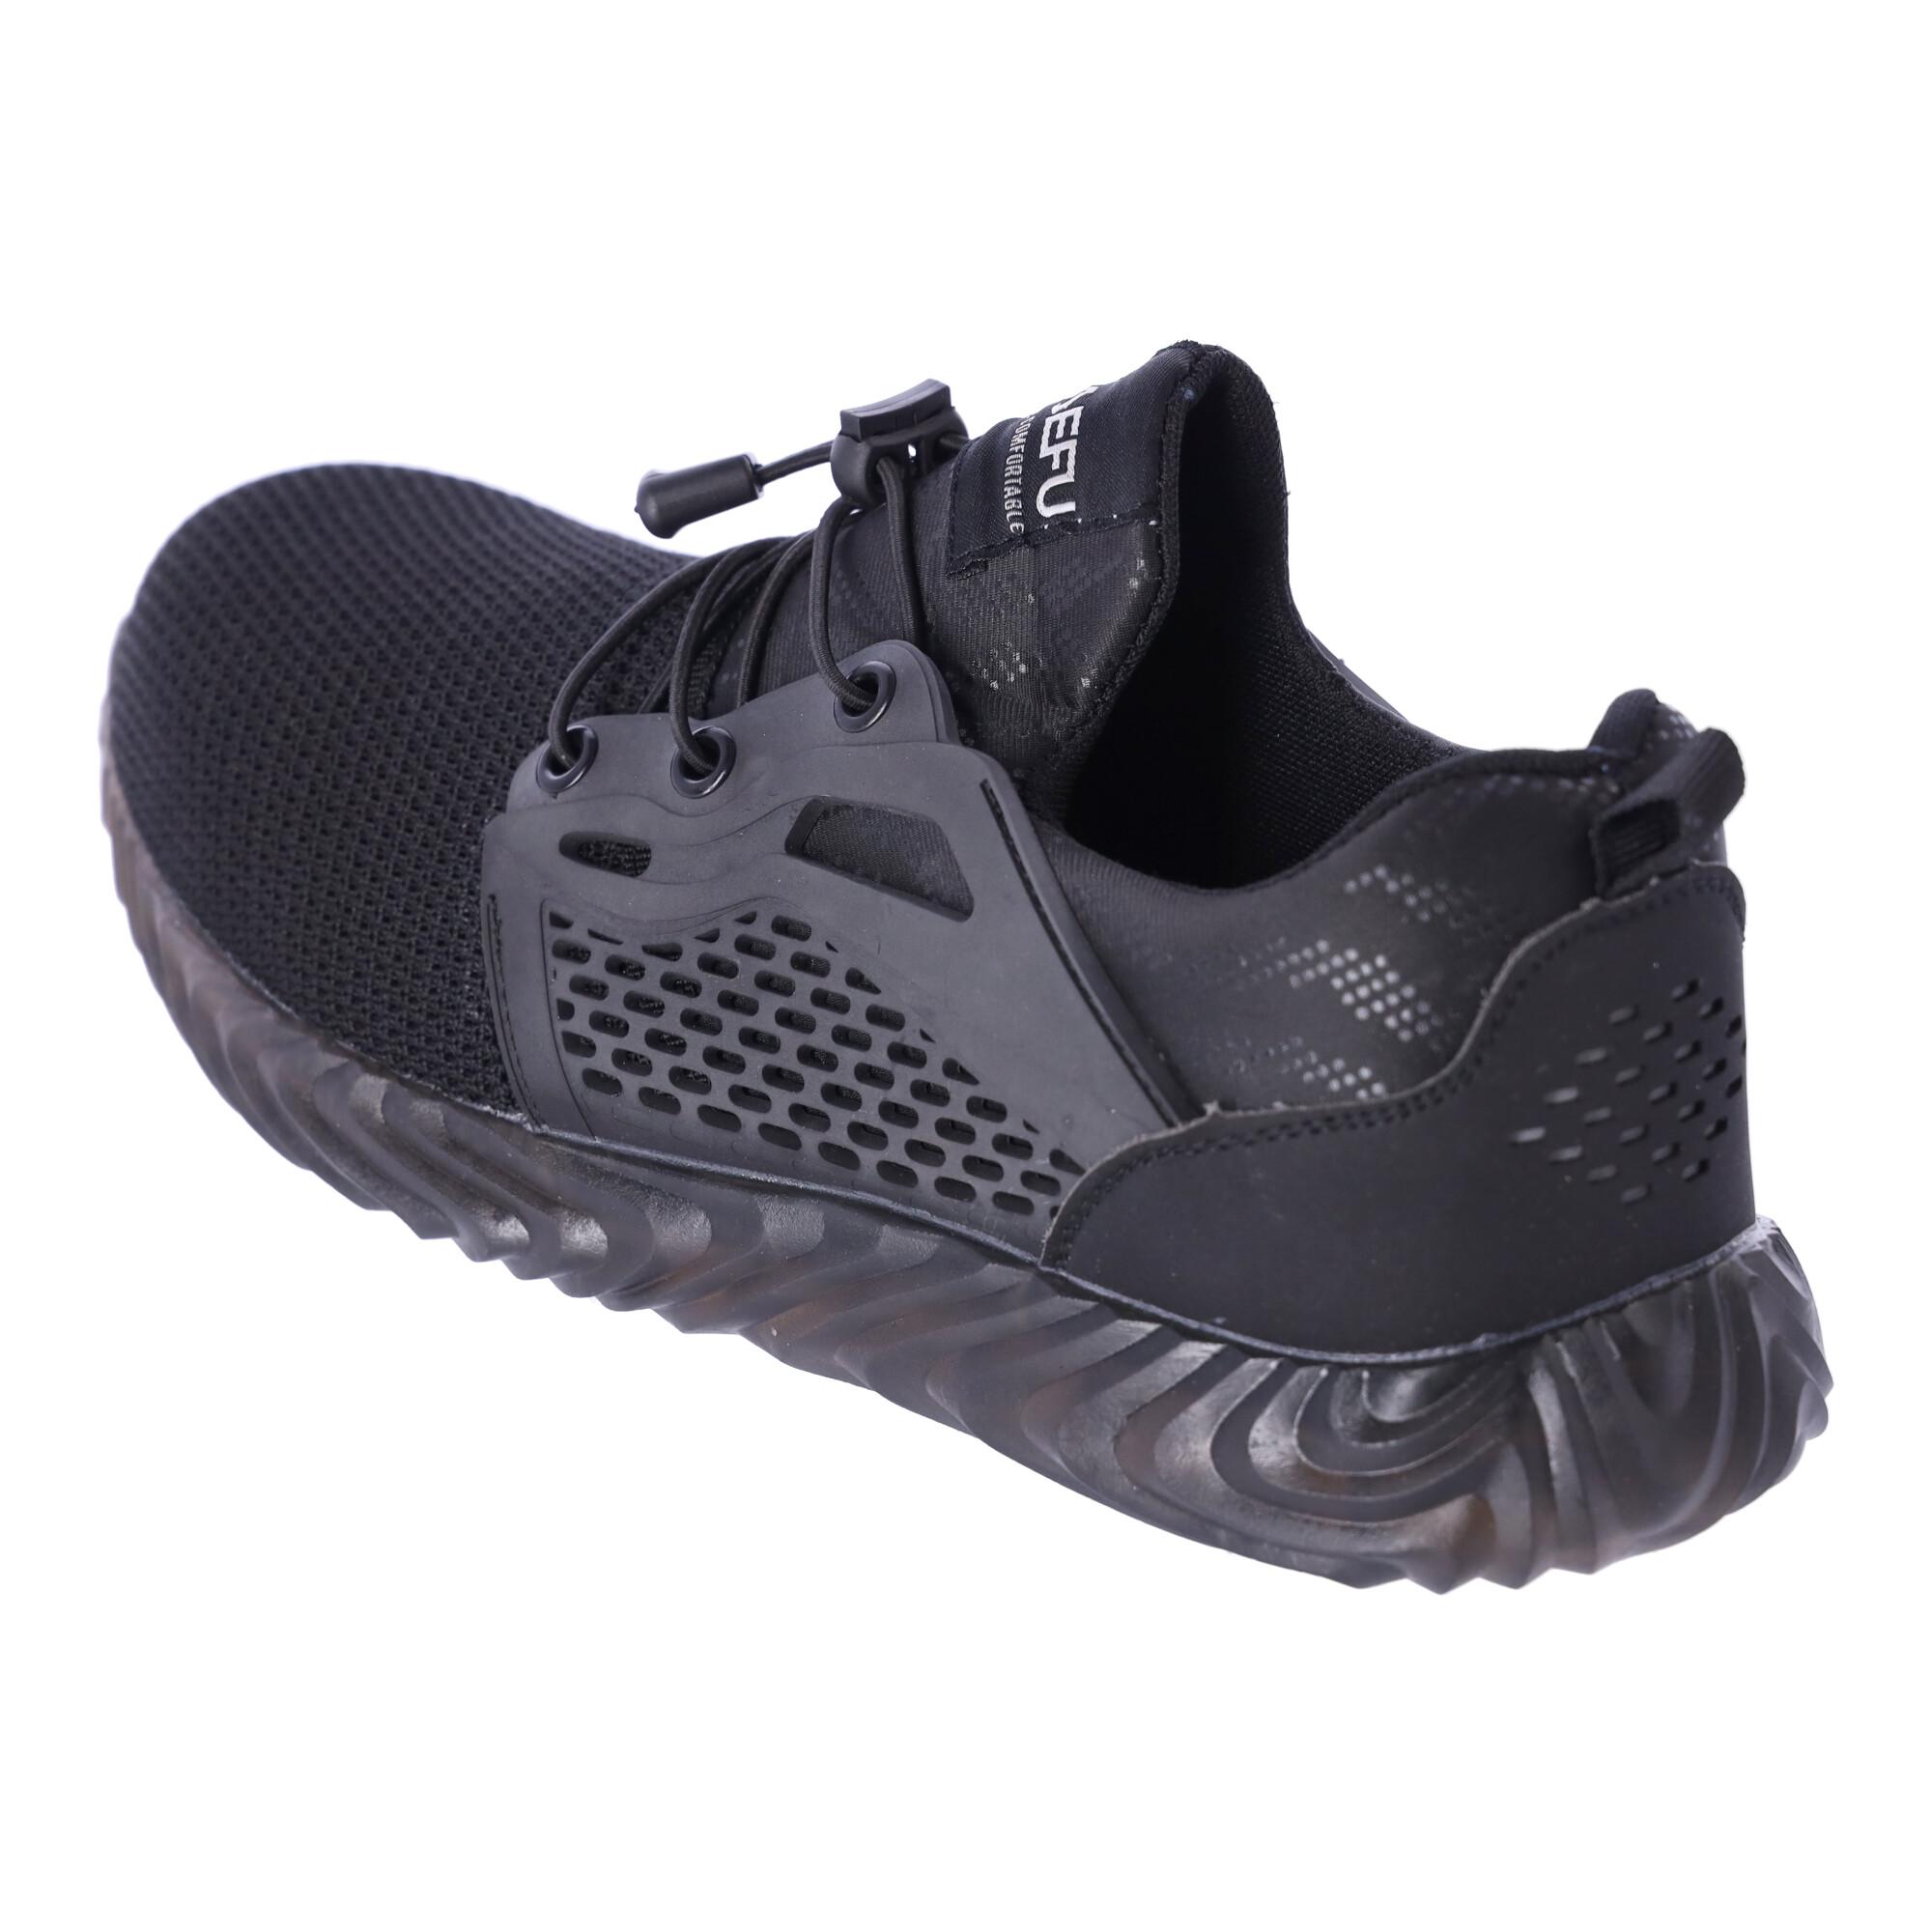 Work safety shoes "41" - black